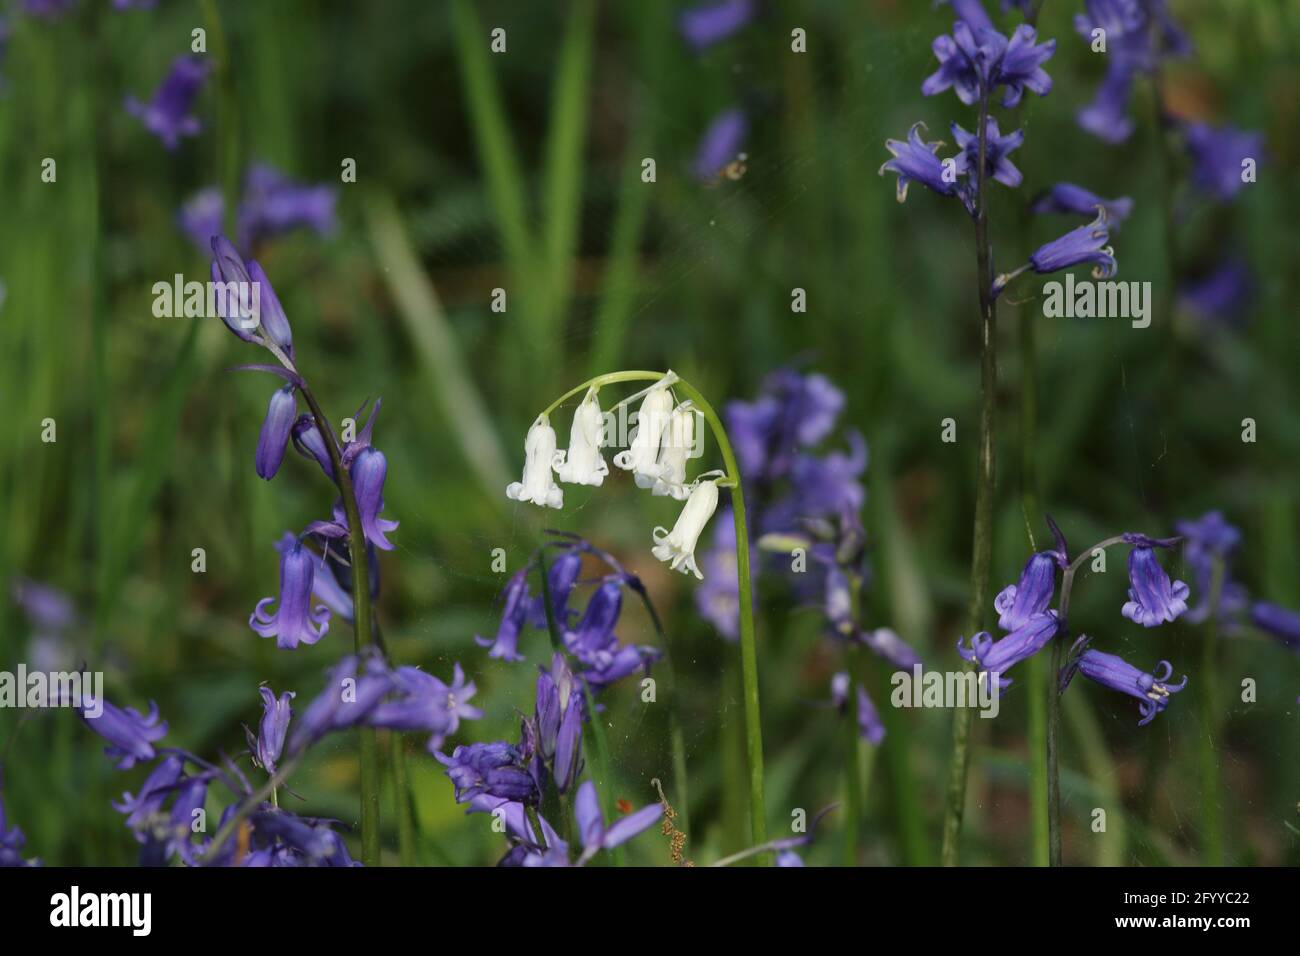 A white flower head of a Bluebell among the common purple plants, this mutation found in a woodland in Scotland, in the springtime blaze of colour. Stock Photo